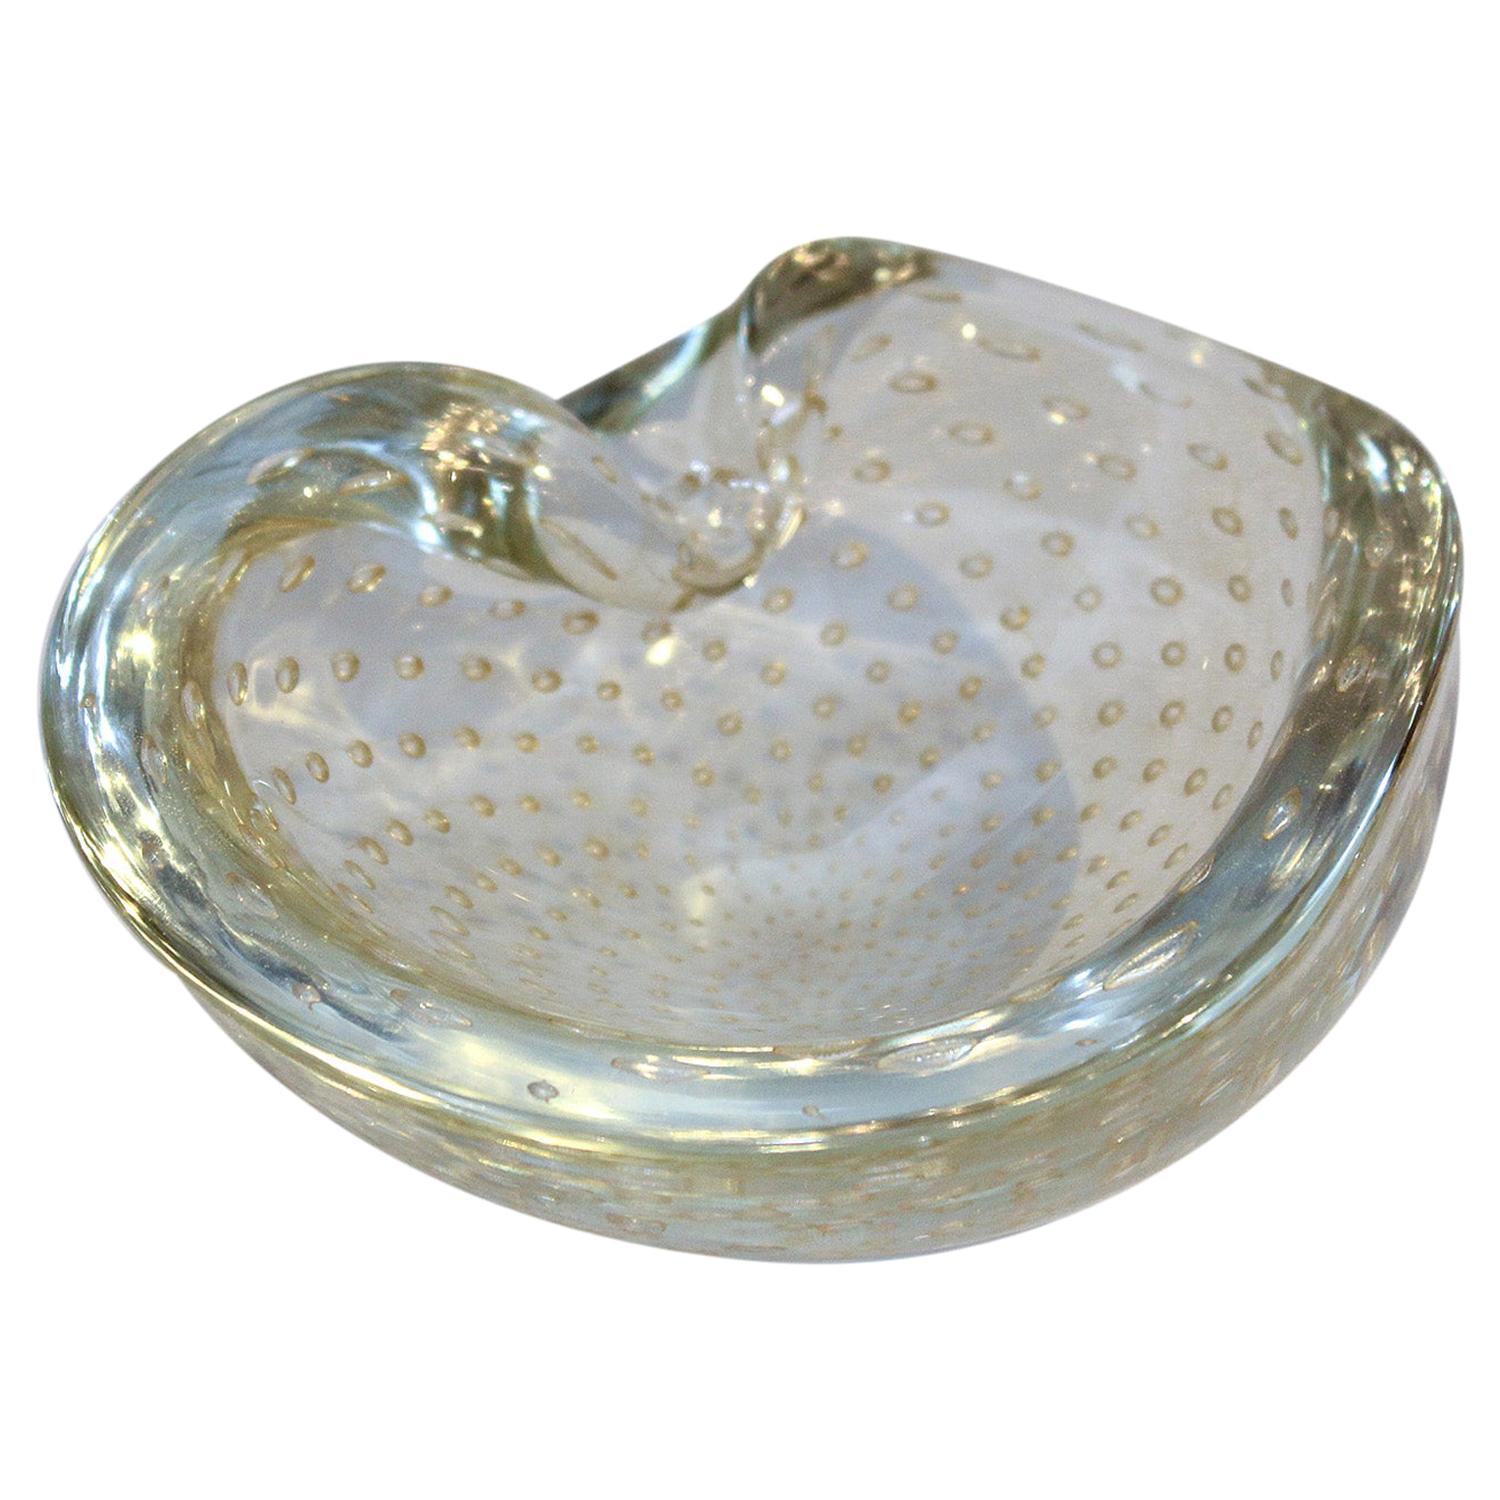 1950s Seguso Murano Glass Gold Dusted Kidney Shaped Bowl with Controlled Bubbles For Sale